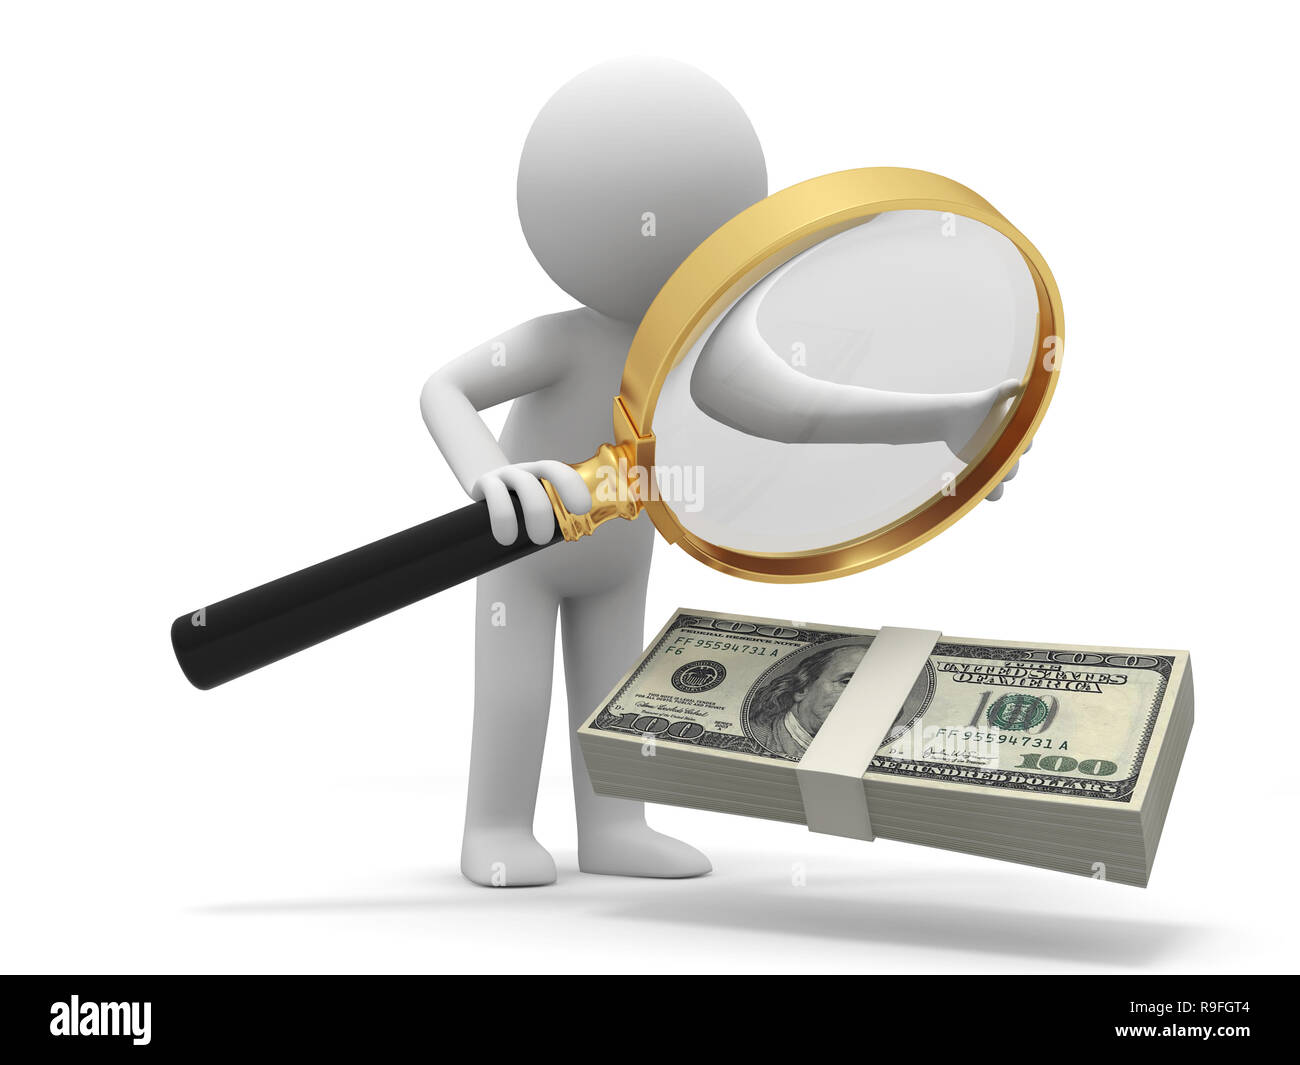 Dollar,Magnifying glass, a person watching a bundle of dollars with a magnifying glass Stock Photo